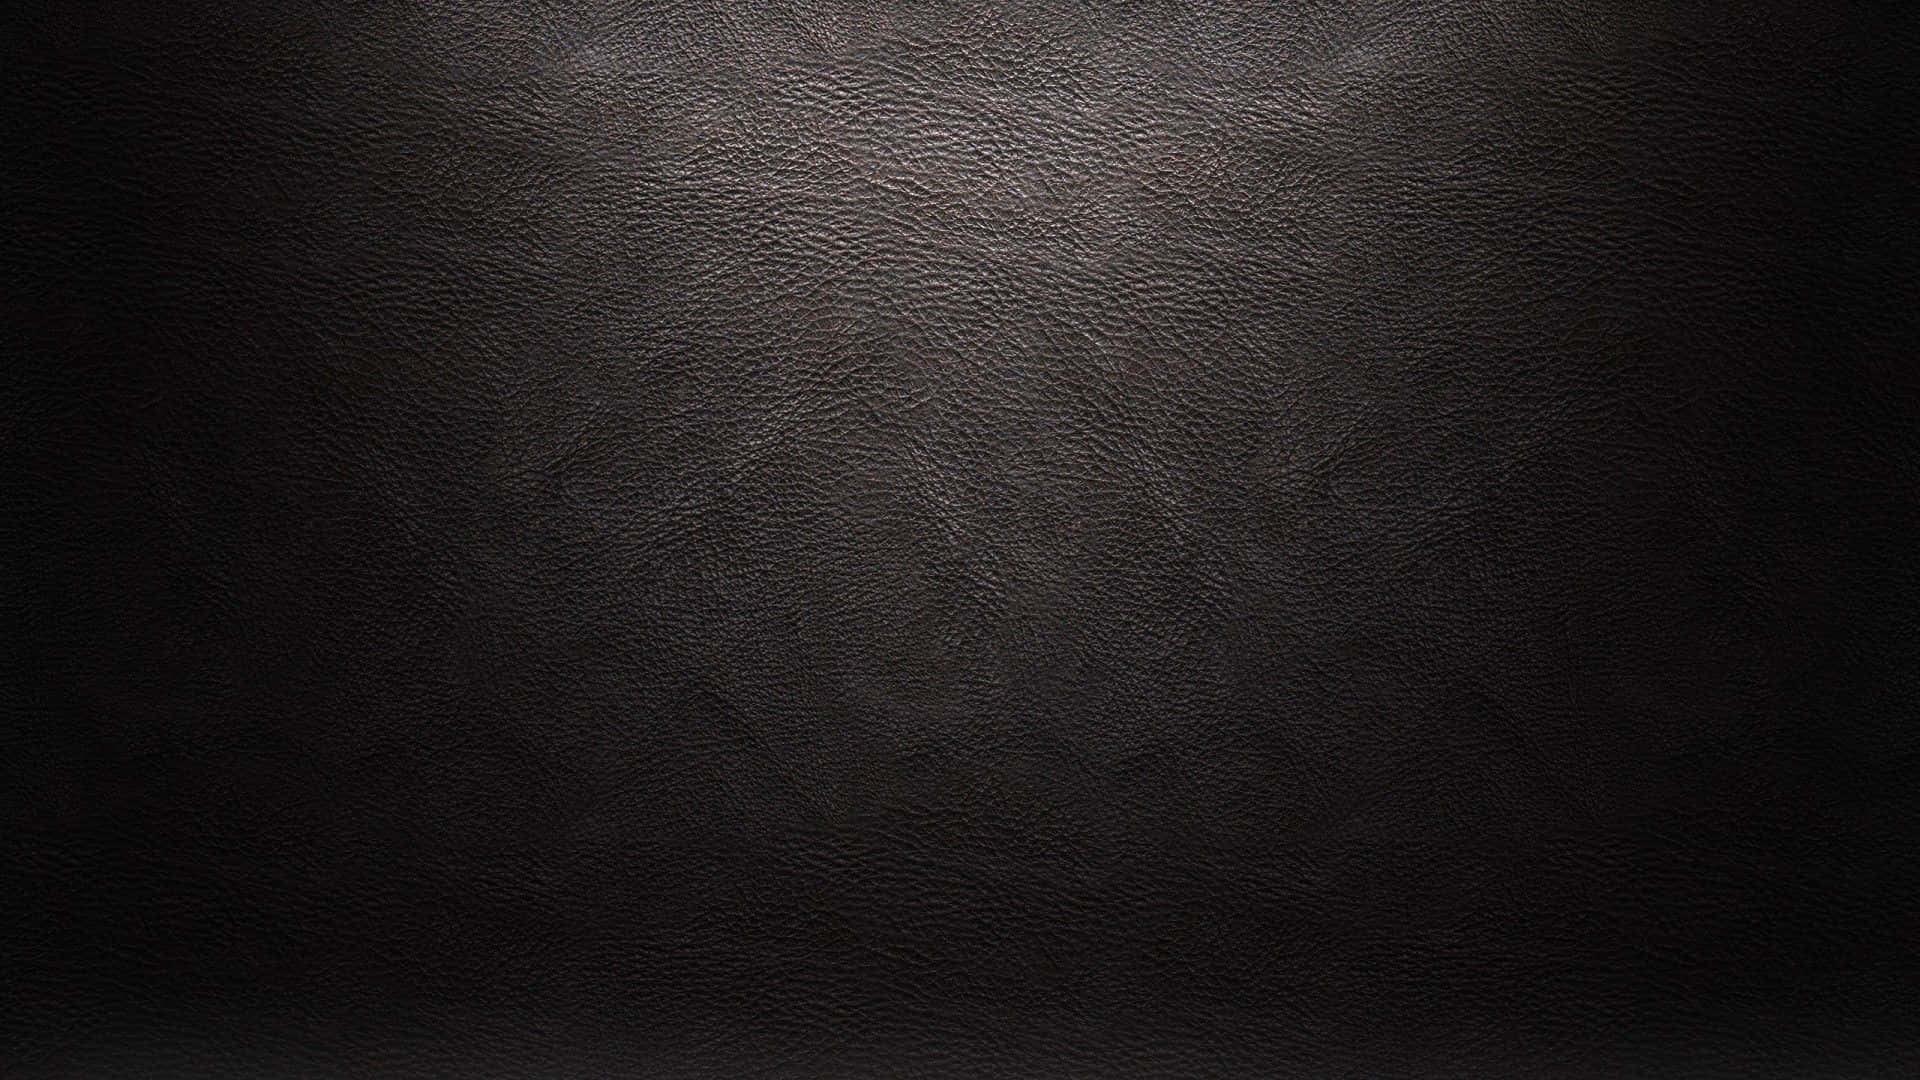 Black And Grey Leather Texture Background